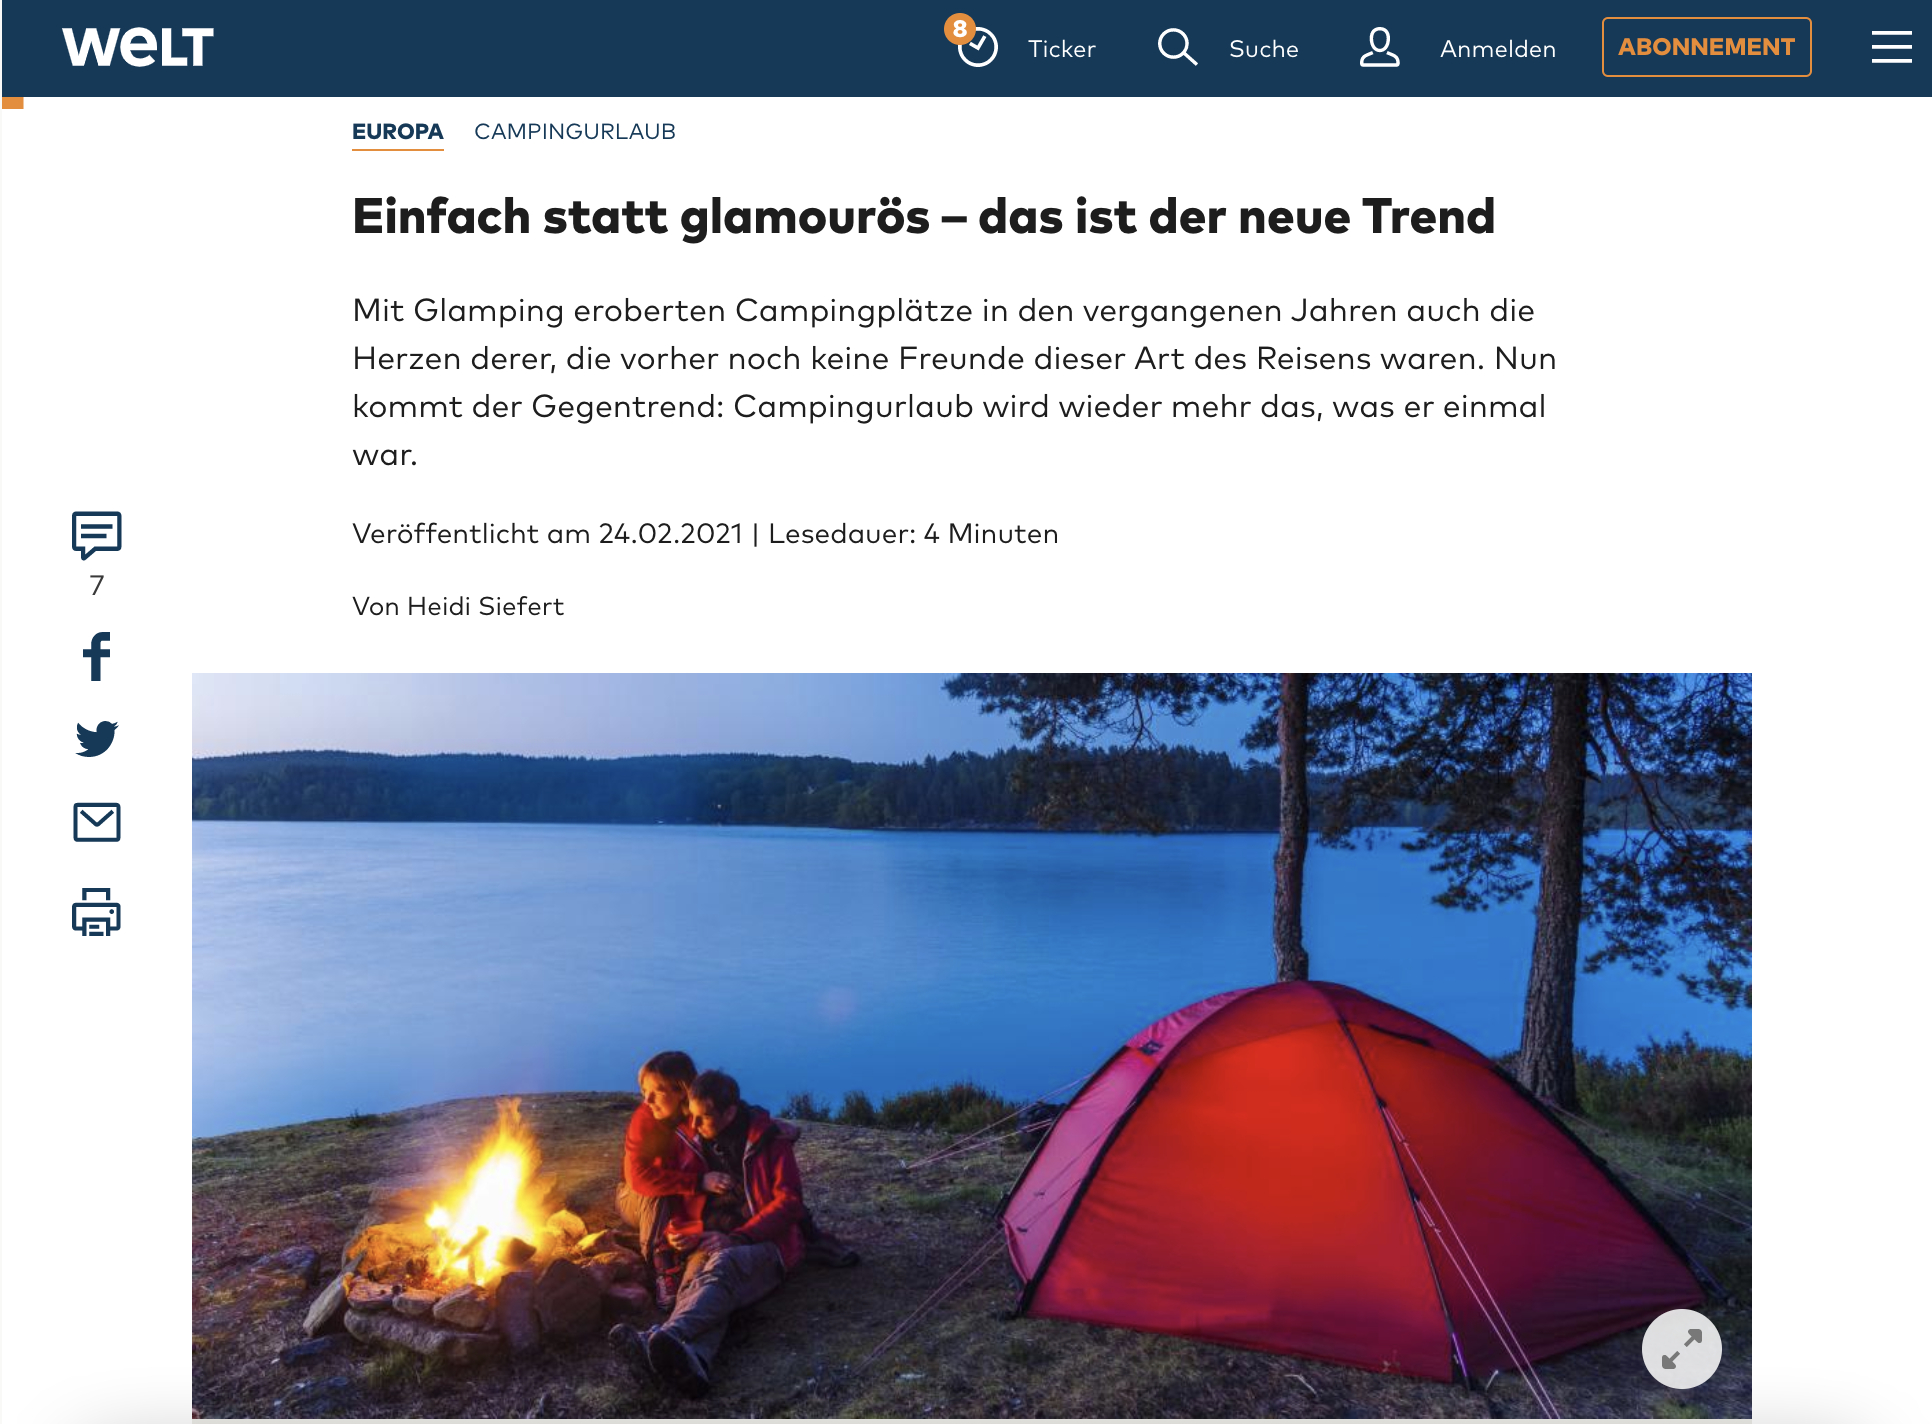 24 Ferbruary, 2021 — Welt om nye camping trends